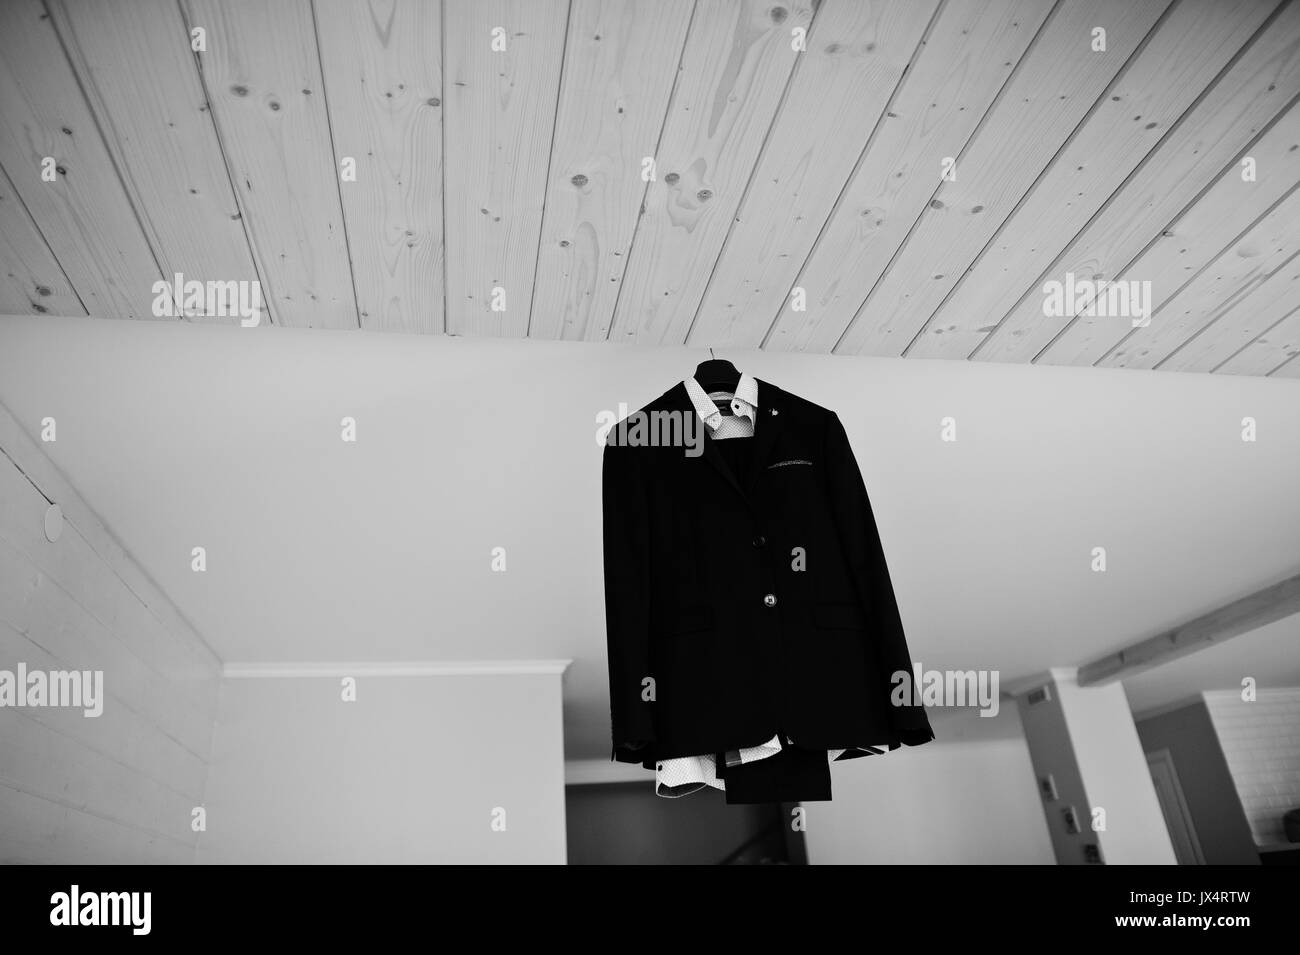 Groom's wedding suit hanging on the rack in big light room. Black and white photo. Stock Photo